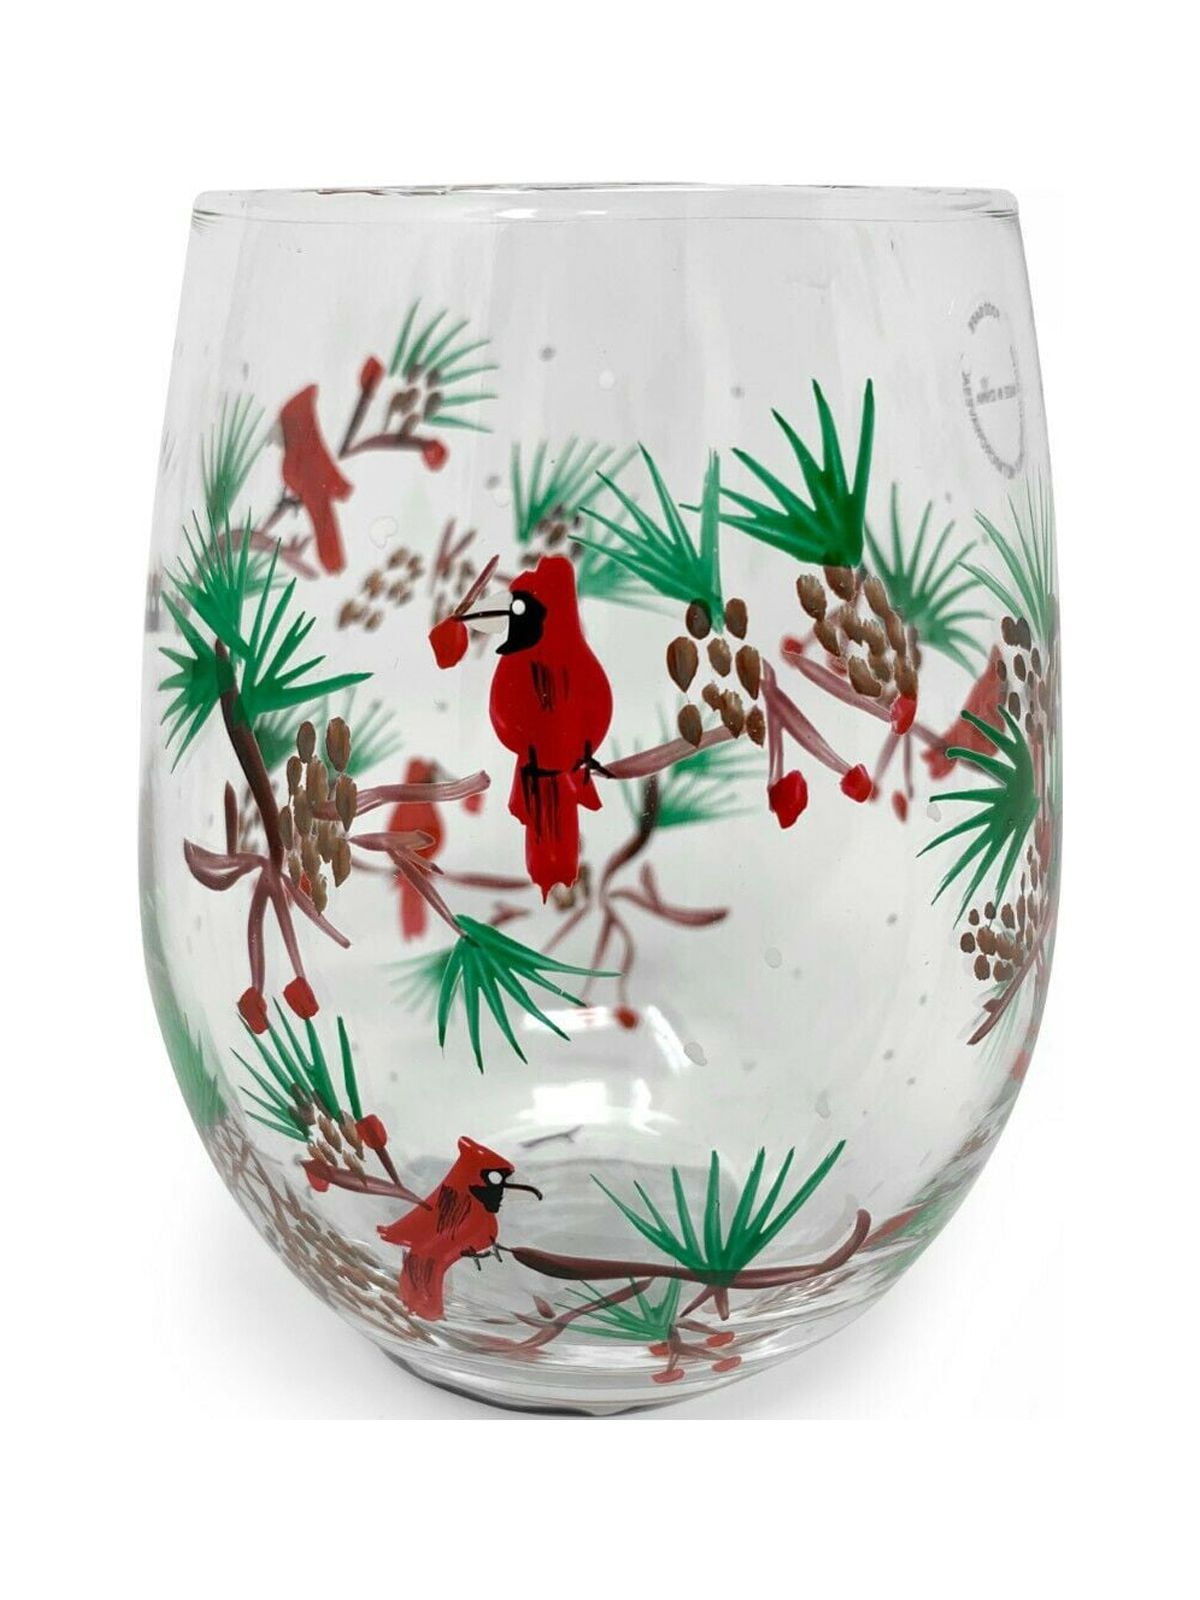 VINGLACE STEMLESS WINE GLASS - Magpies Gifts